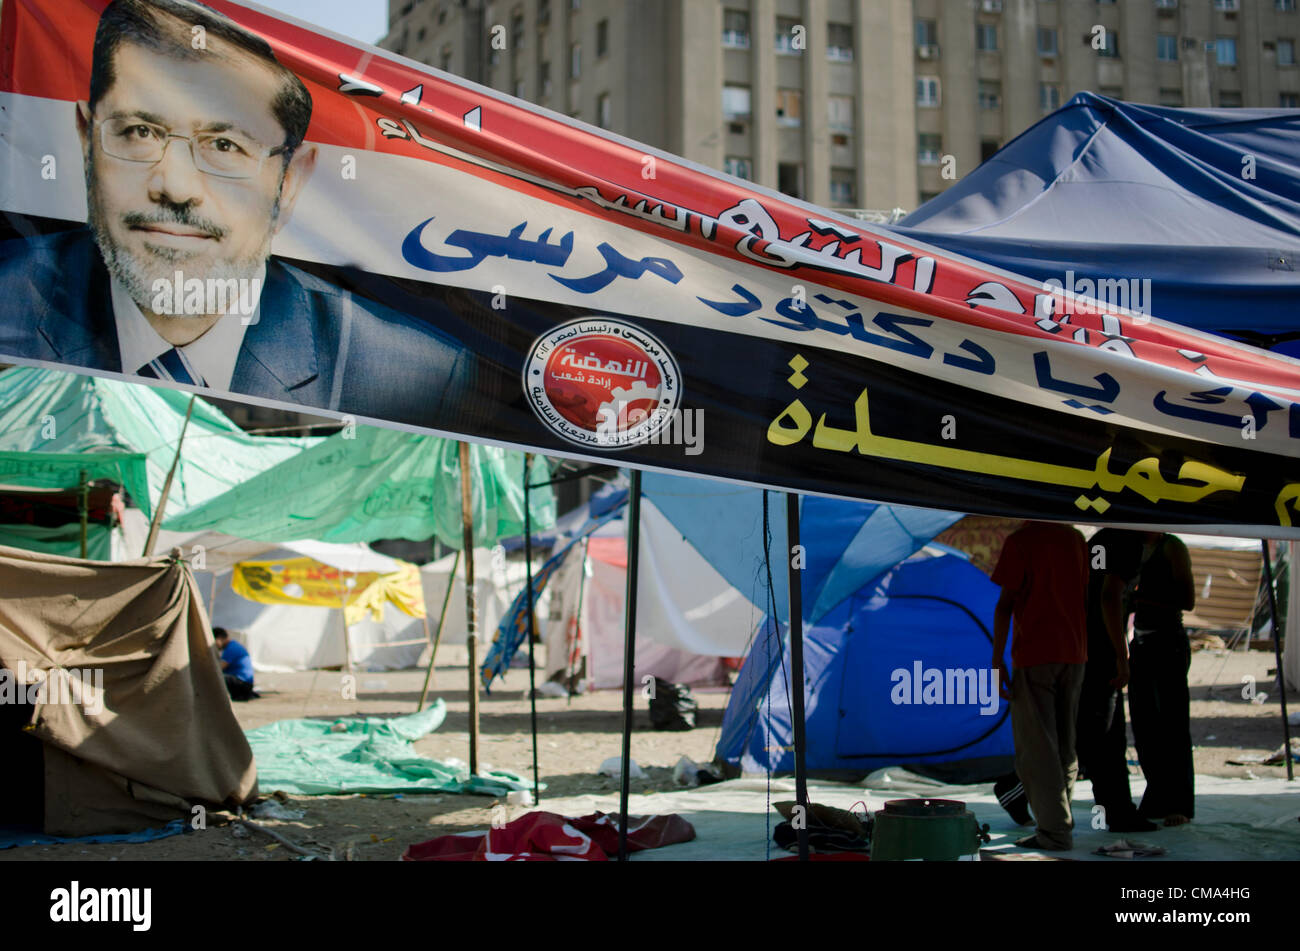 Supporters of the presidential candidate Mohammed Morsi camp out in Cairo's Tahrir Square in Egypt on Sunday July 01, 2012. Stock Photo